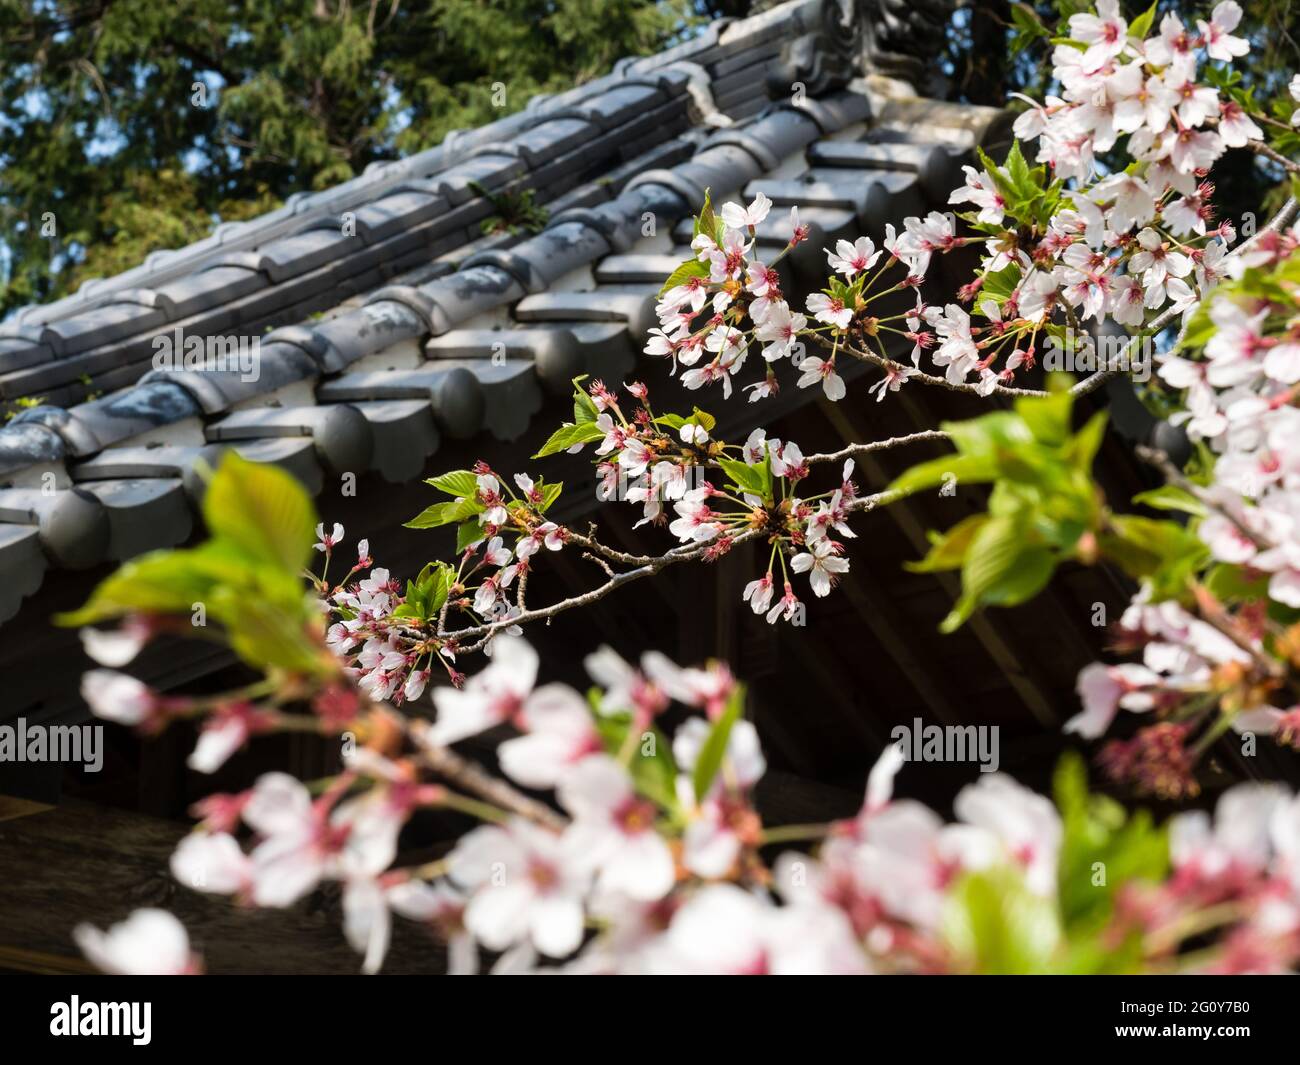 Cherry blossoms at a Buddhist temple in Japan Stock Photo